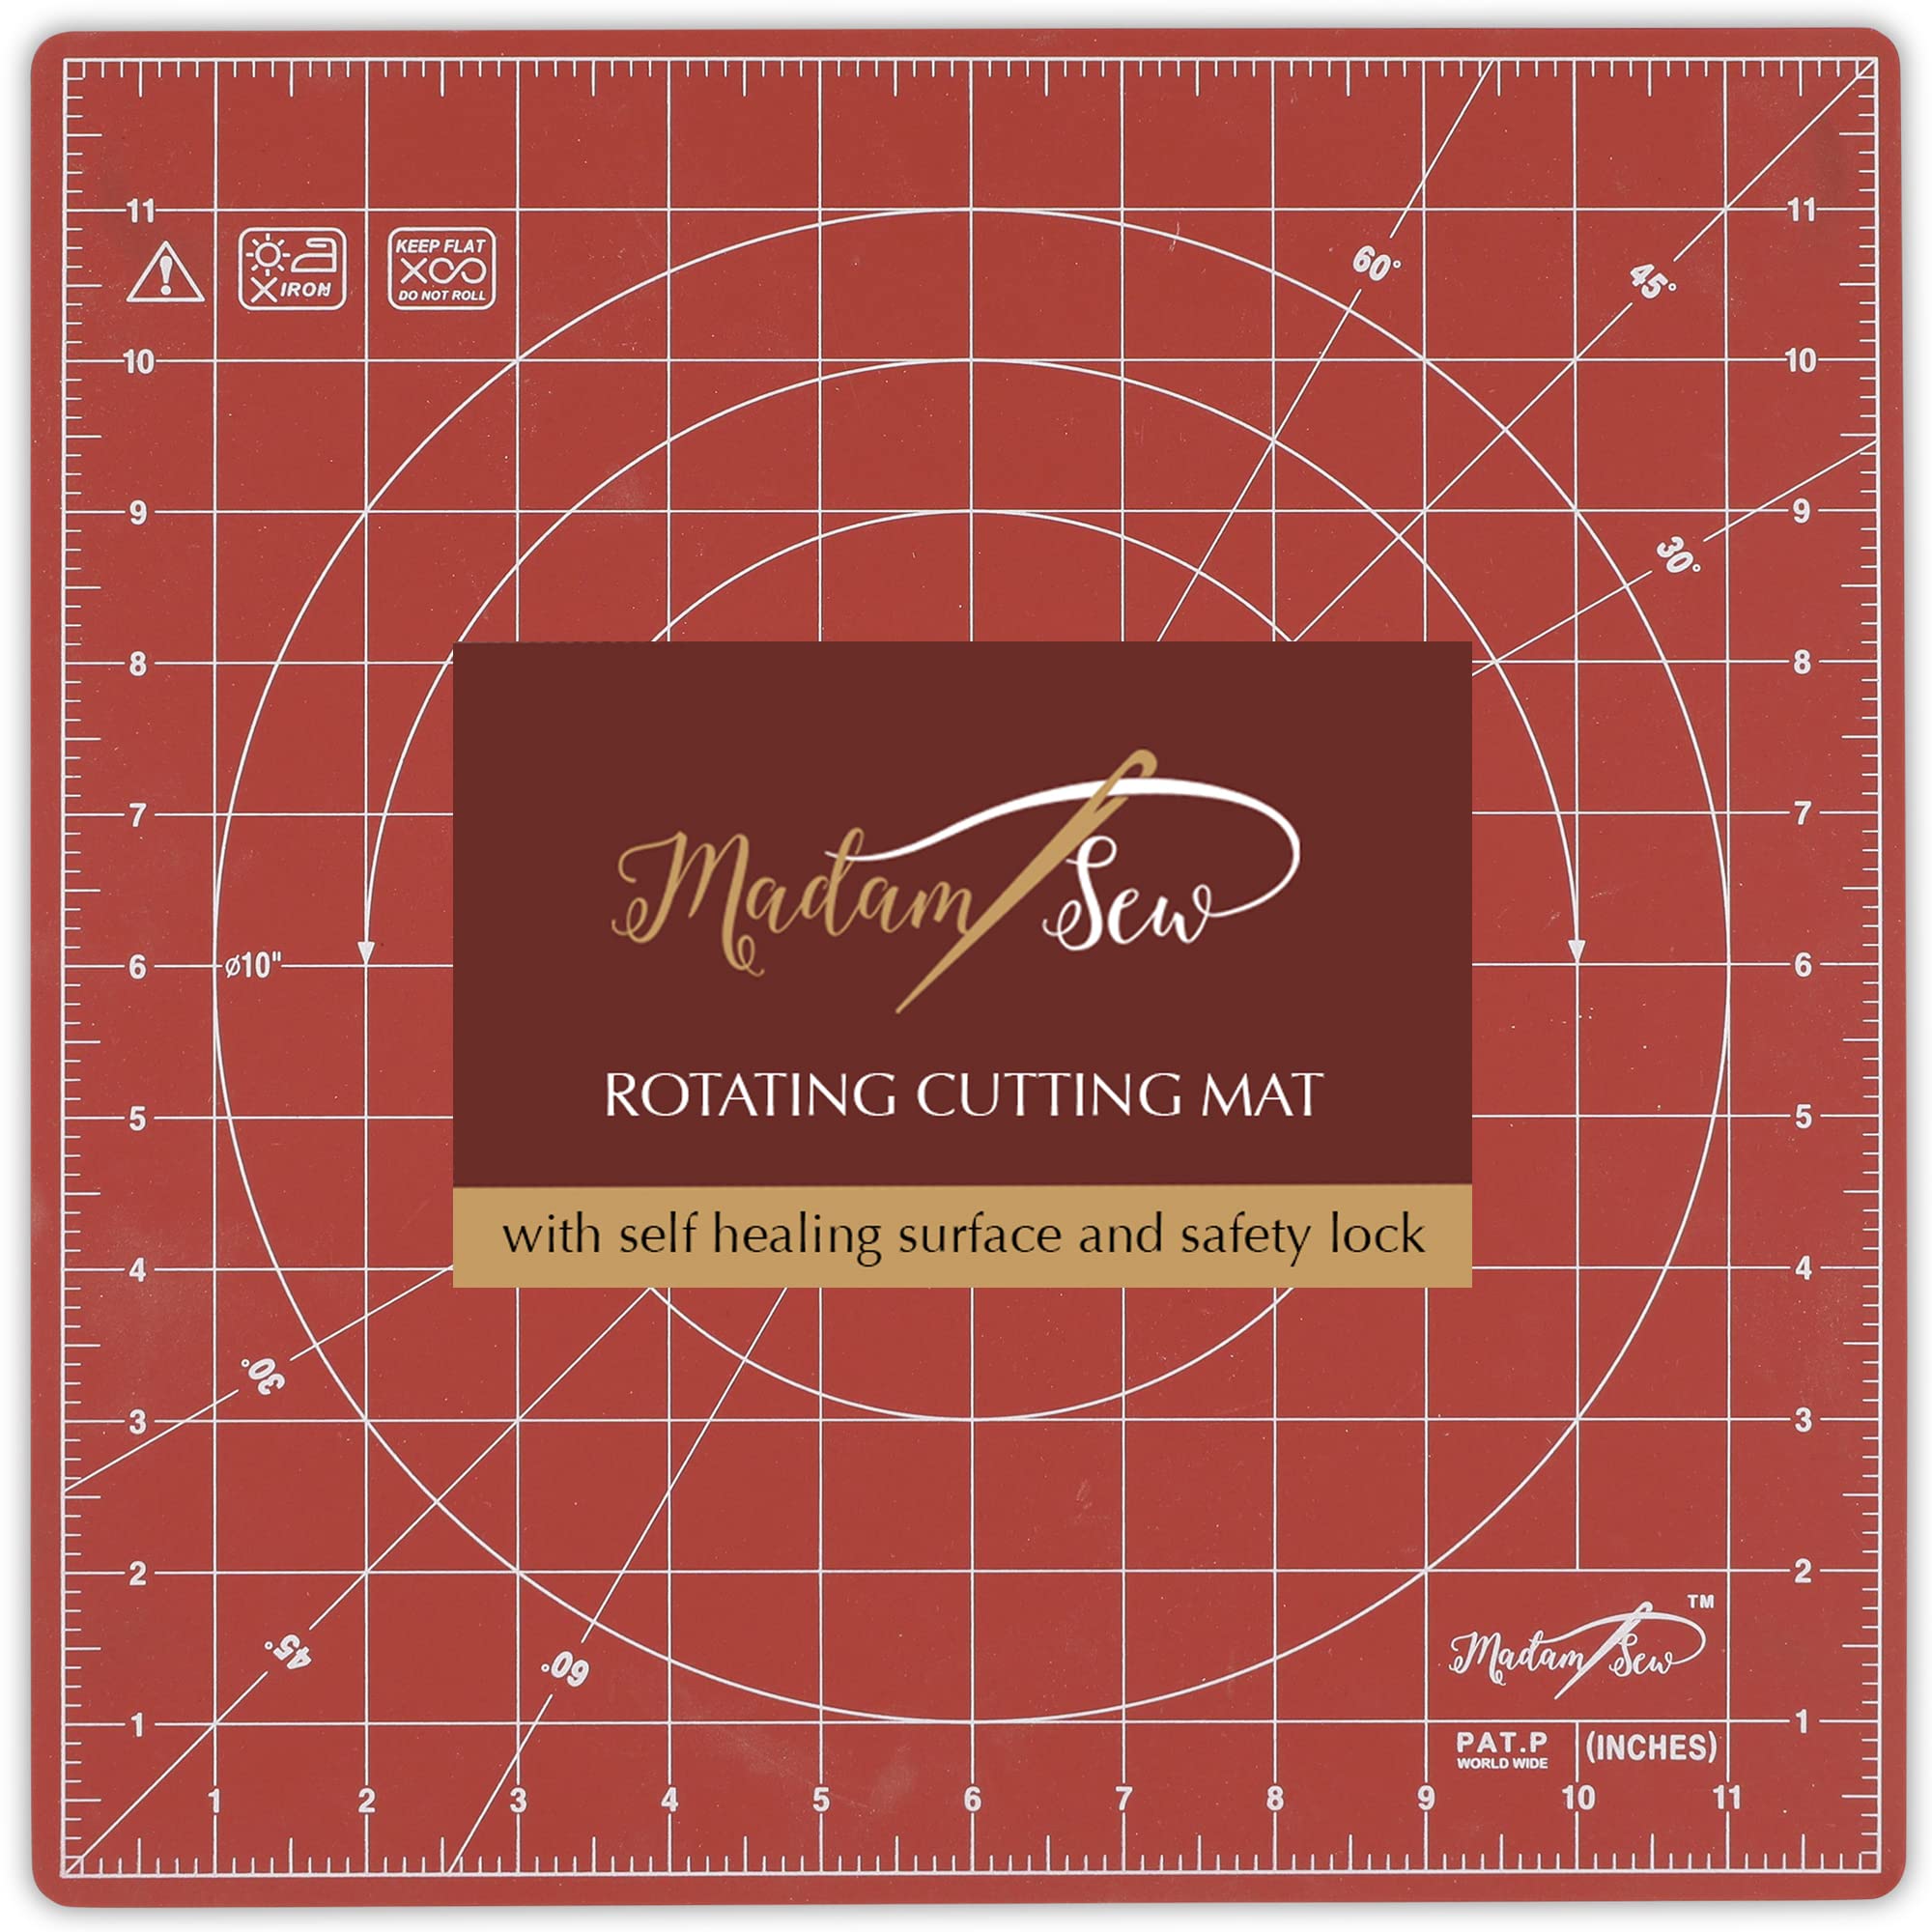 Madam Sew Self Healing Cutting Mat, 12x12 Rotating Cutting Mat for Quilting,  Sewing and Crafts Features 360 Degree Rotation, Lockable Non-Slip Base and  Accurate Grid and Bias Lines for Precise Cuts